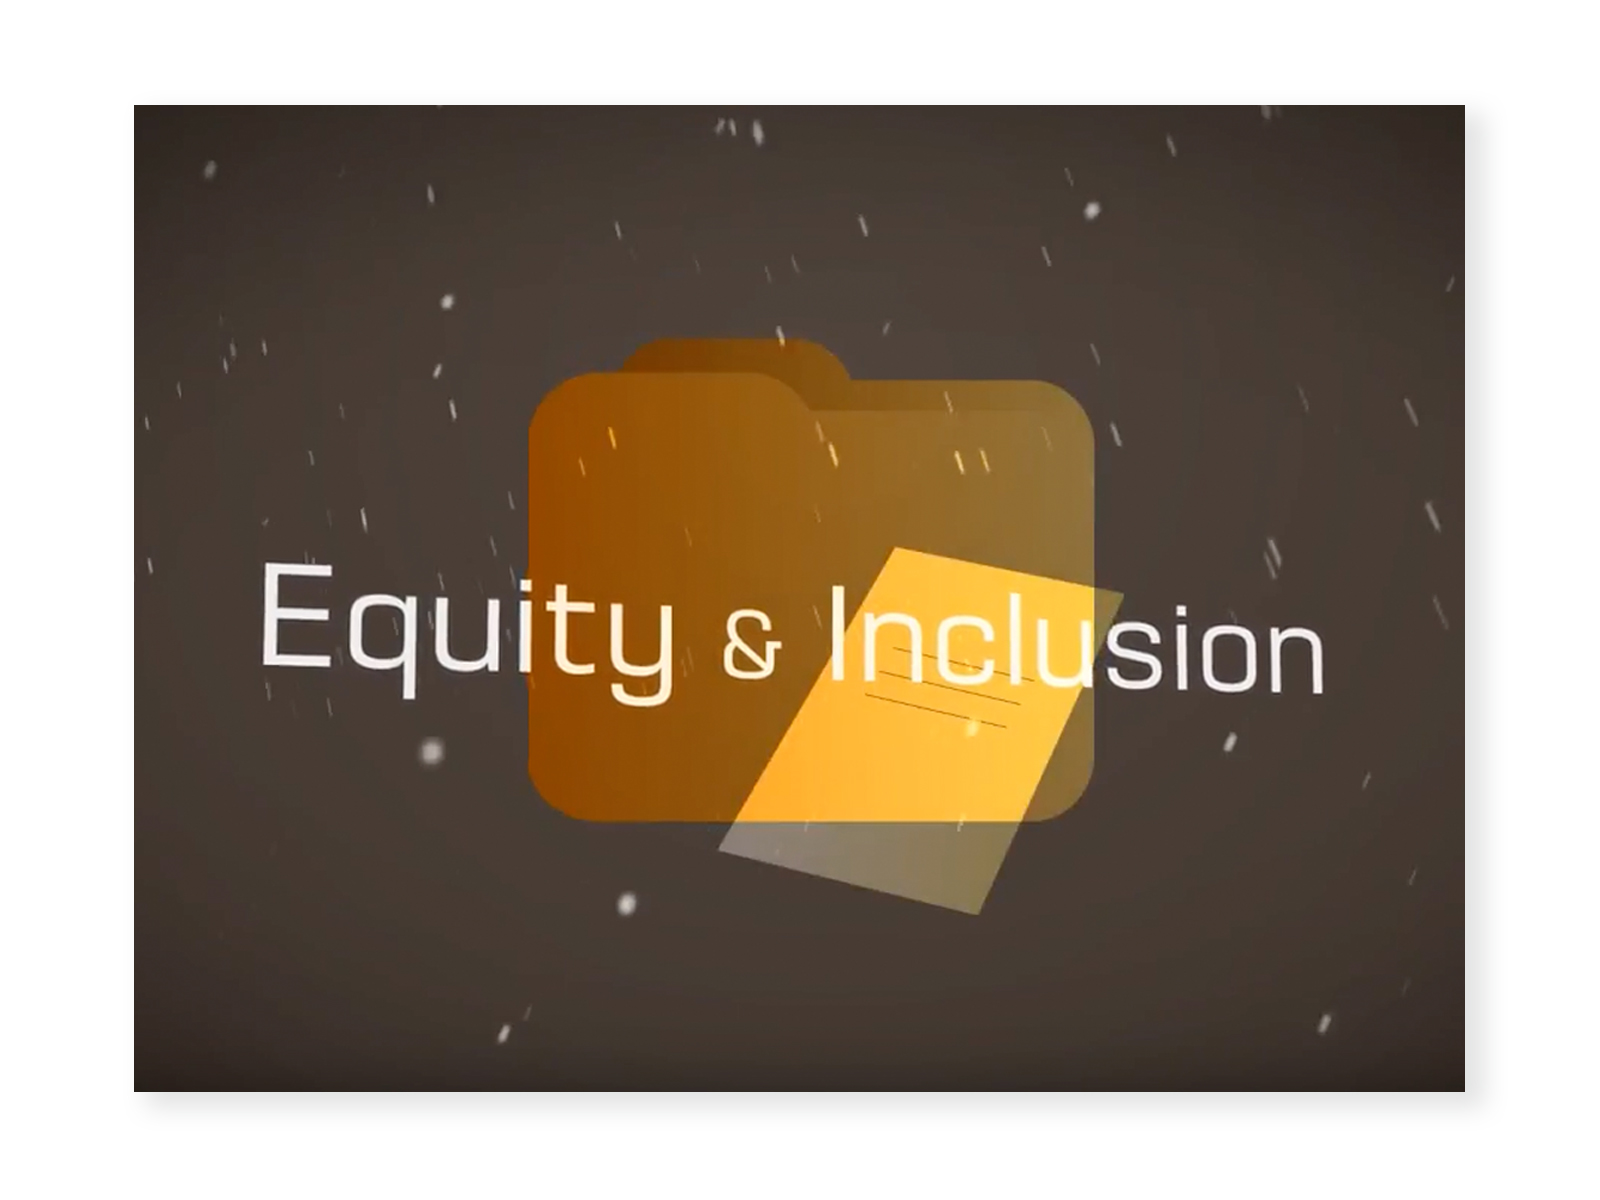 Screenshot from "Equity and Inclusion" video - brown background with a graphic of a file folder and a sheet of paper. The words "Equity & Inclusion" are overlayed.